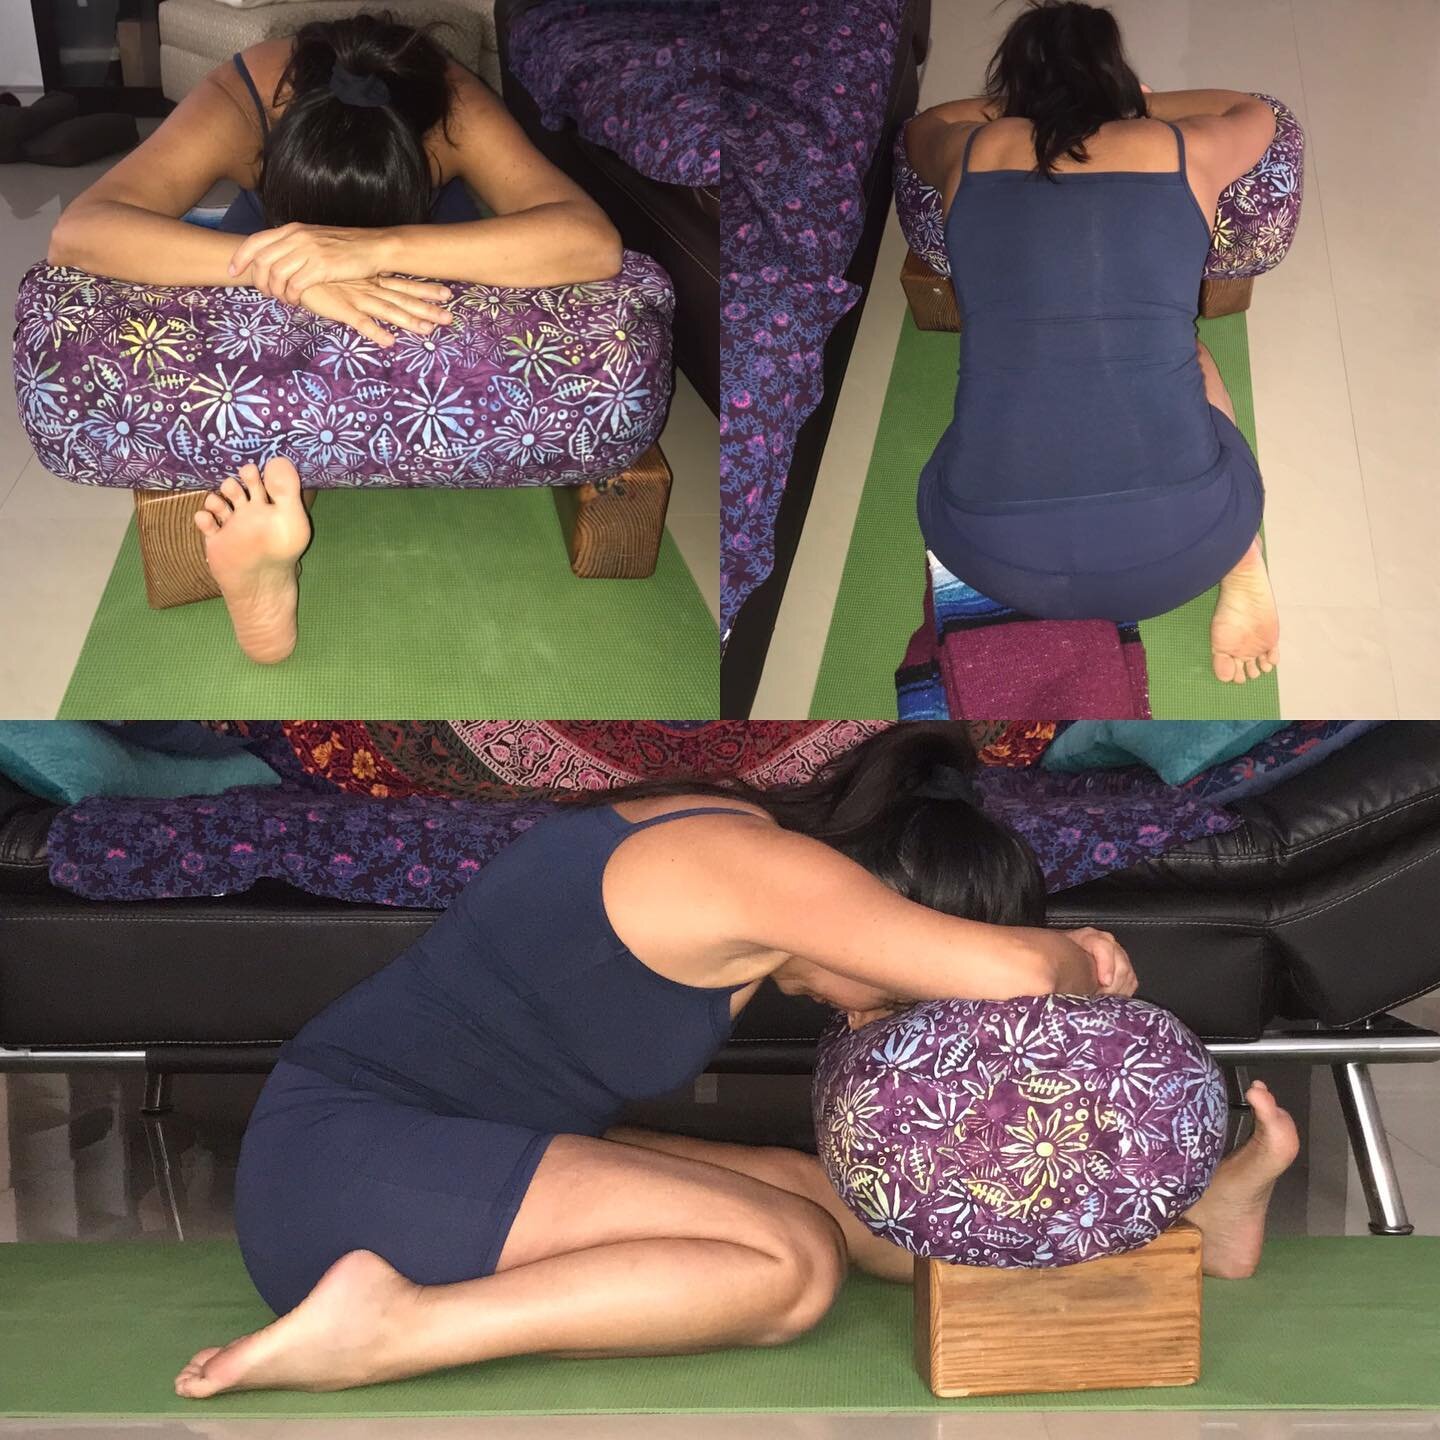 These pictures were taken last year during covid infection. The support gave relief to the nerves, and it made breathing easier. Yes, the thoracic spine could go deeper, but just being able to let go and not work so deeply to attain the perfect pose 